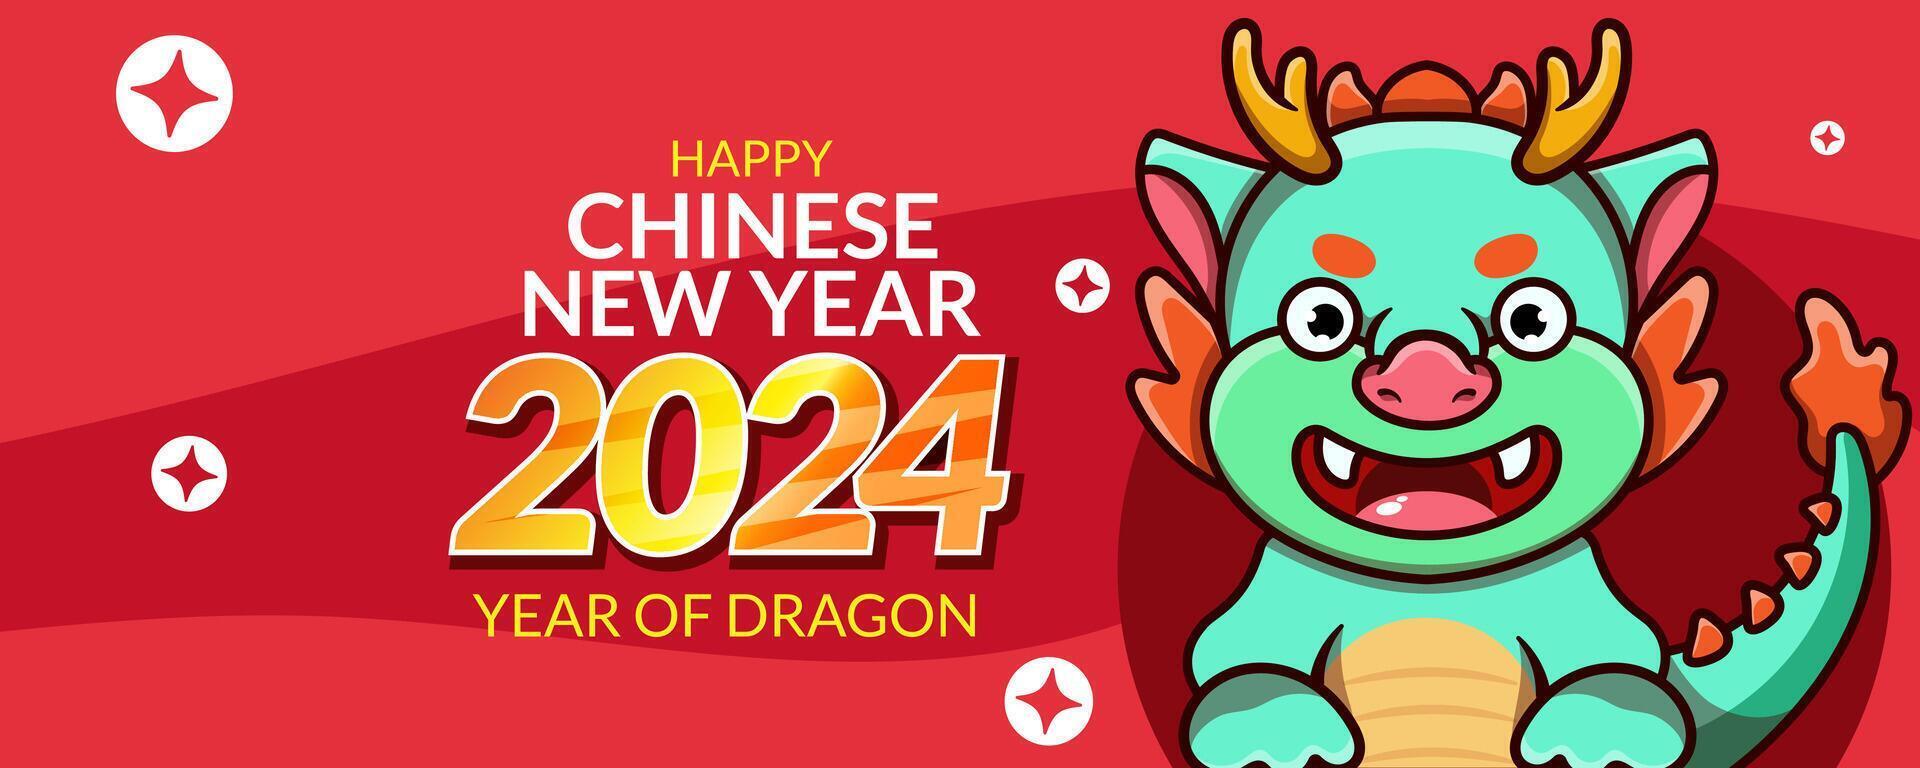 Red Banner Happy chinese new year 2024 year of dragon vector illustration background poster